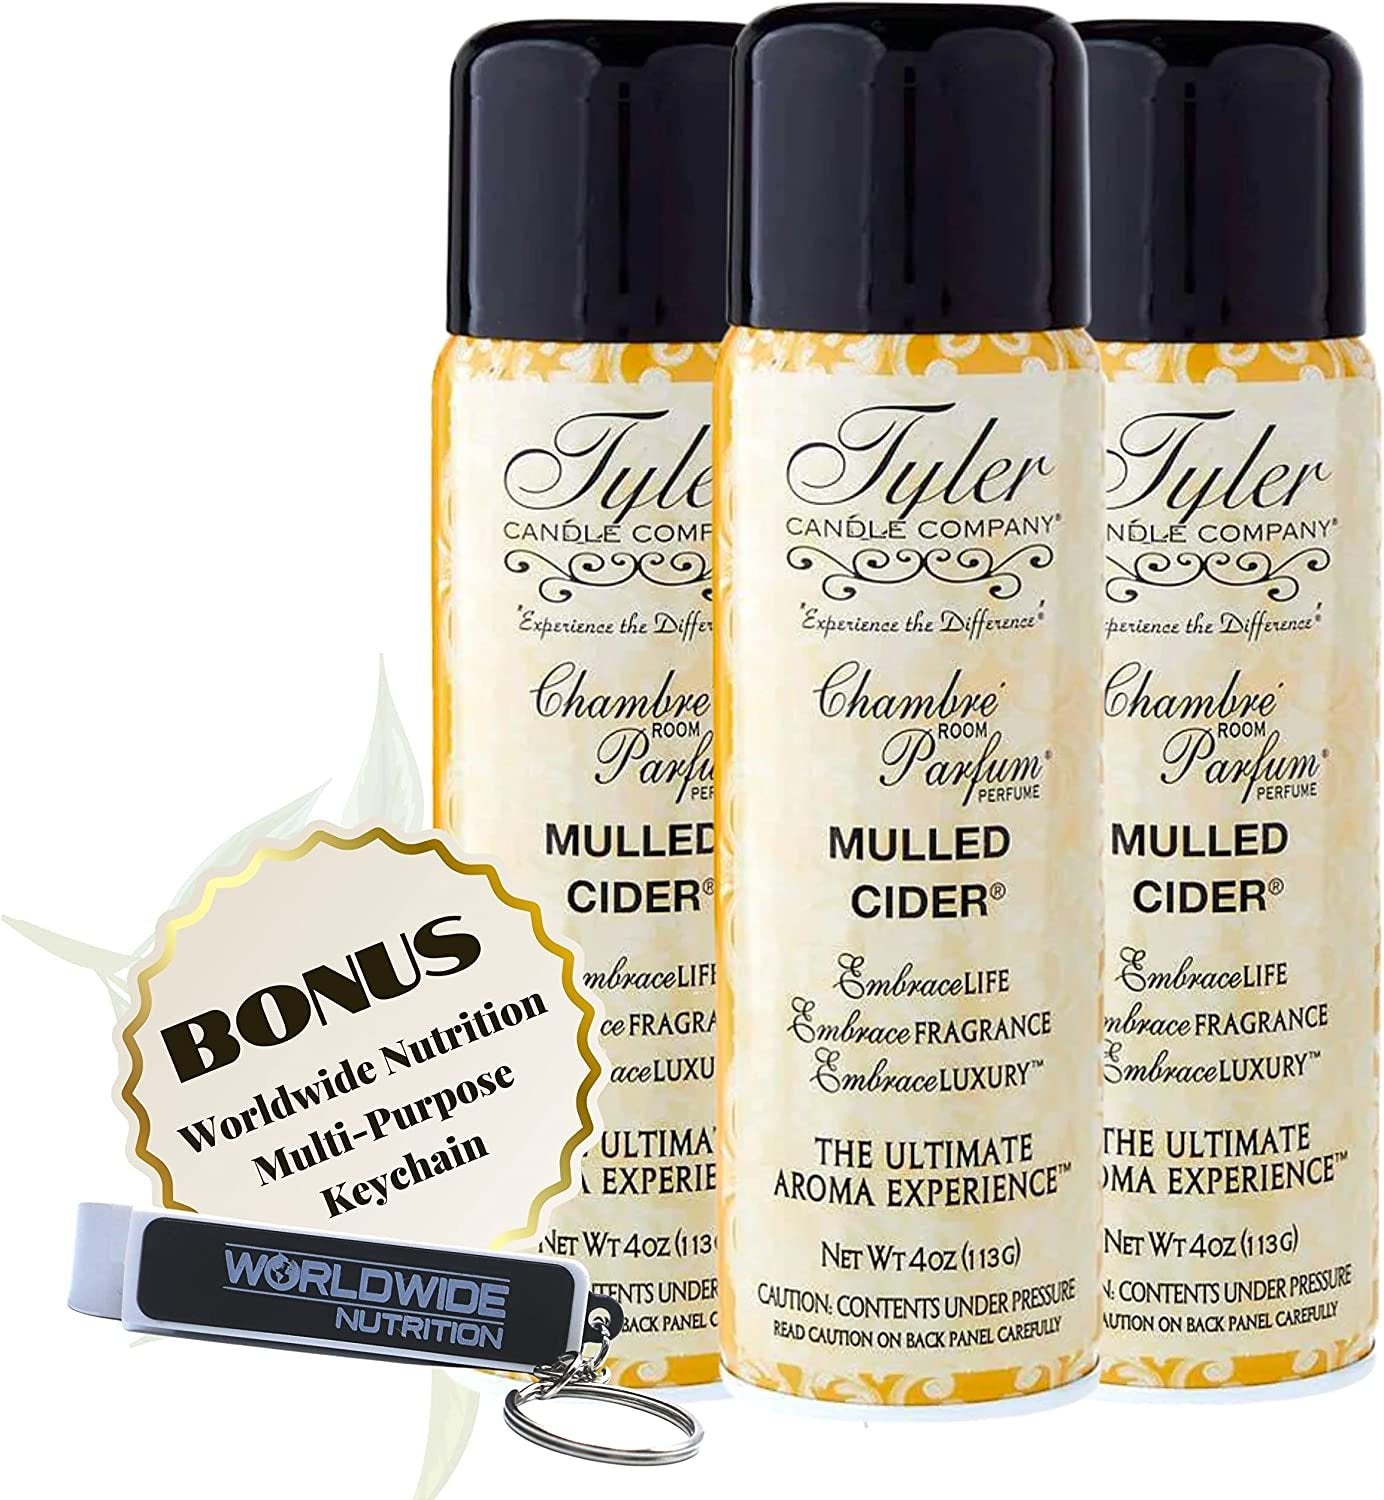 Tyler Candle Company Mulled Cider Signature Fragrance Chambre Parfum - Luxury Scent Air Freshener Spray - Ultimate Aromatic Experience - Home Essentials - 3 Pack of 4 Oz Container with Bonus Key Chain